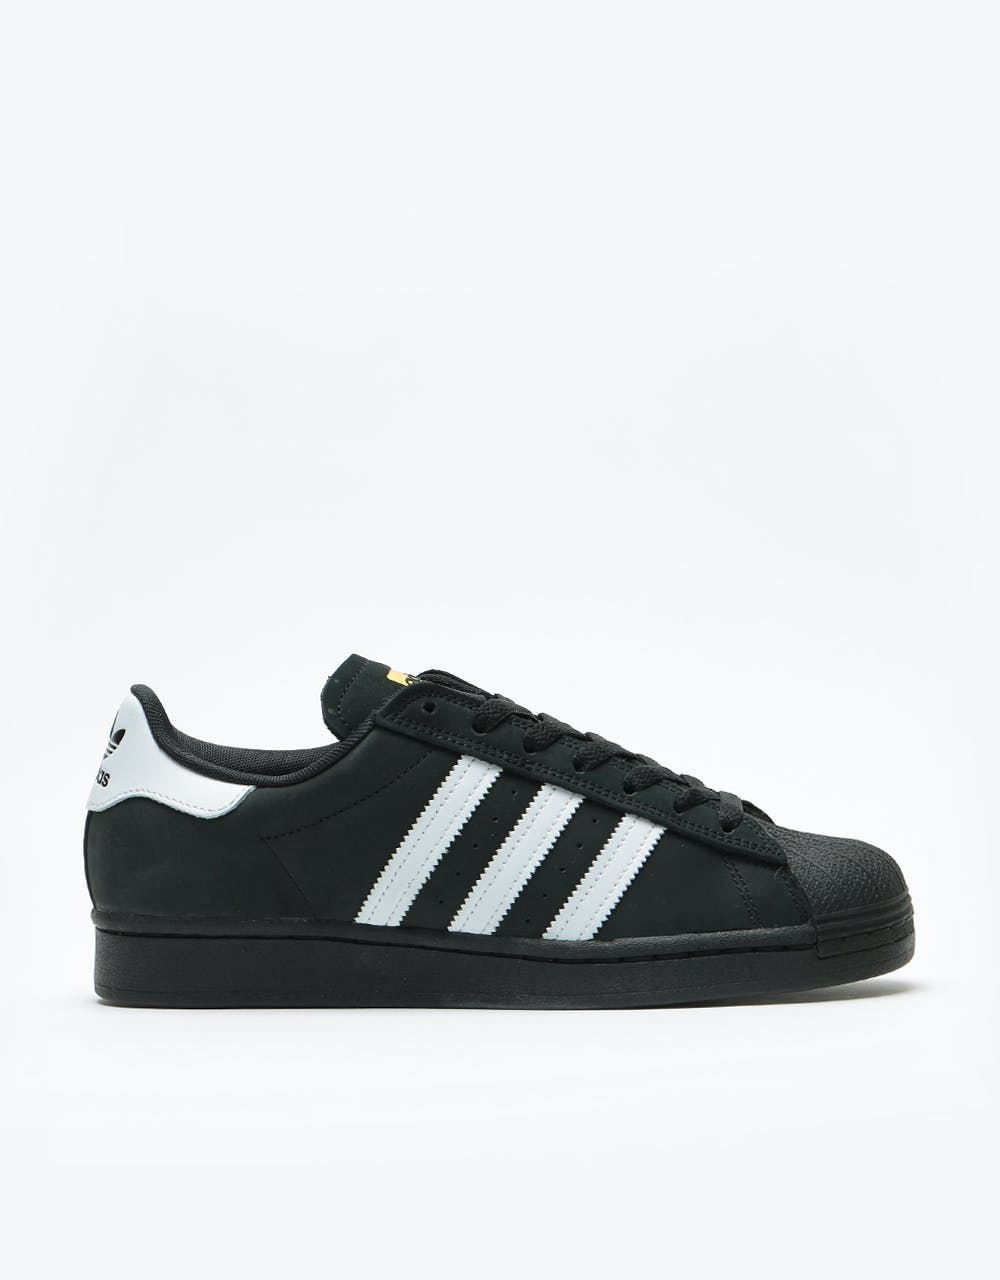 Adidas Superstar Skate Shoes - Core 